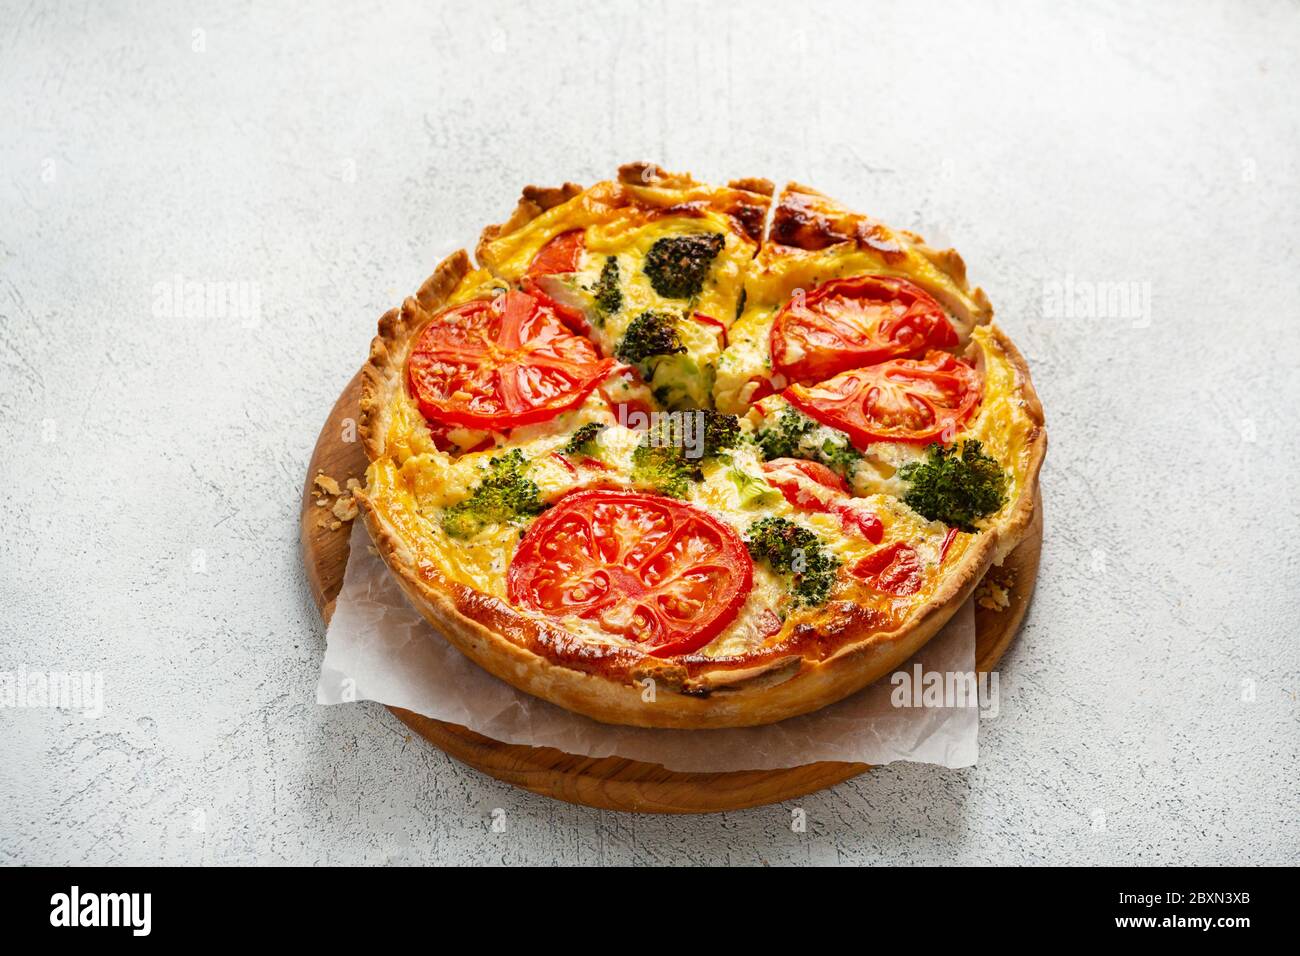 Vegetable tart with broccoli, quiche close up Stock Photo